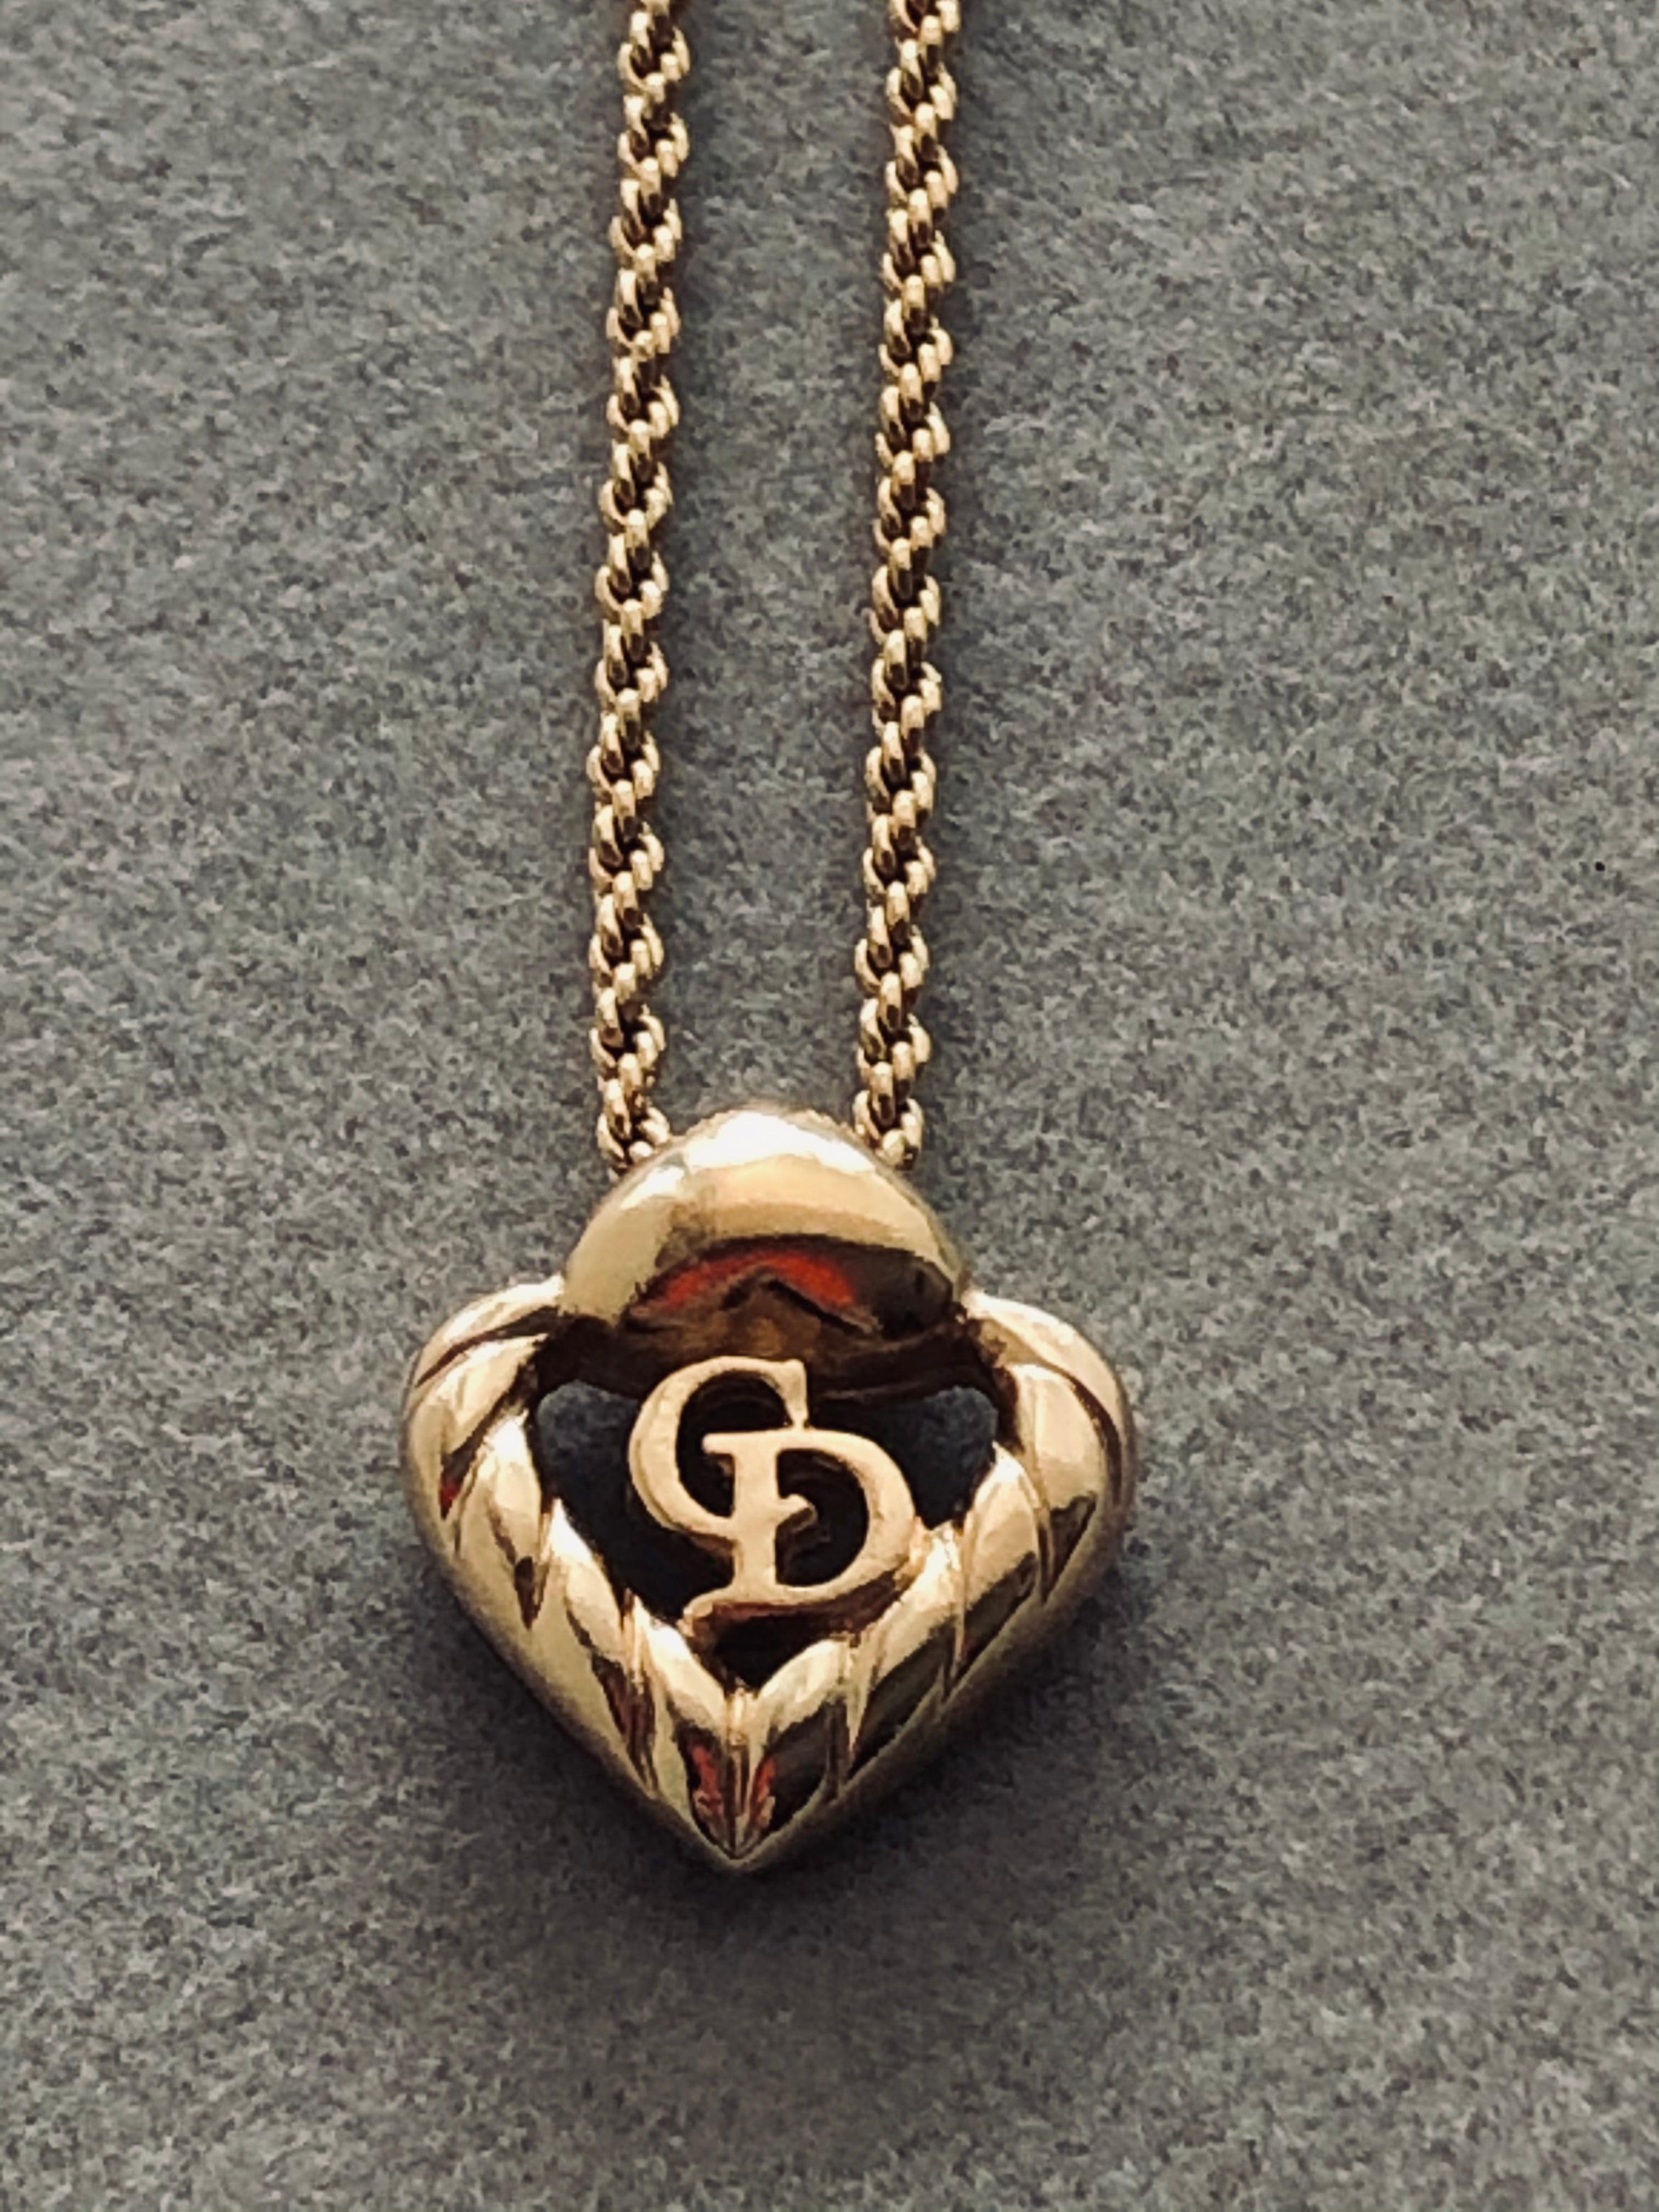 New Arrival Drop!! Christian Dior gold heart necklace - TheLuxeLouis